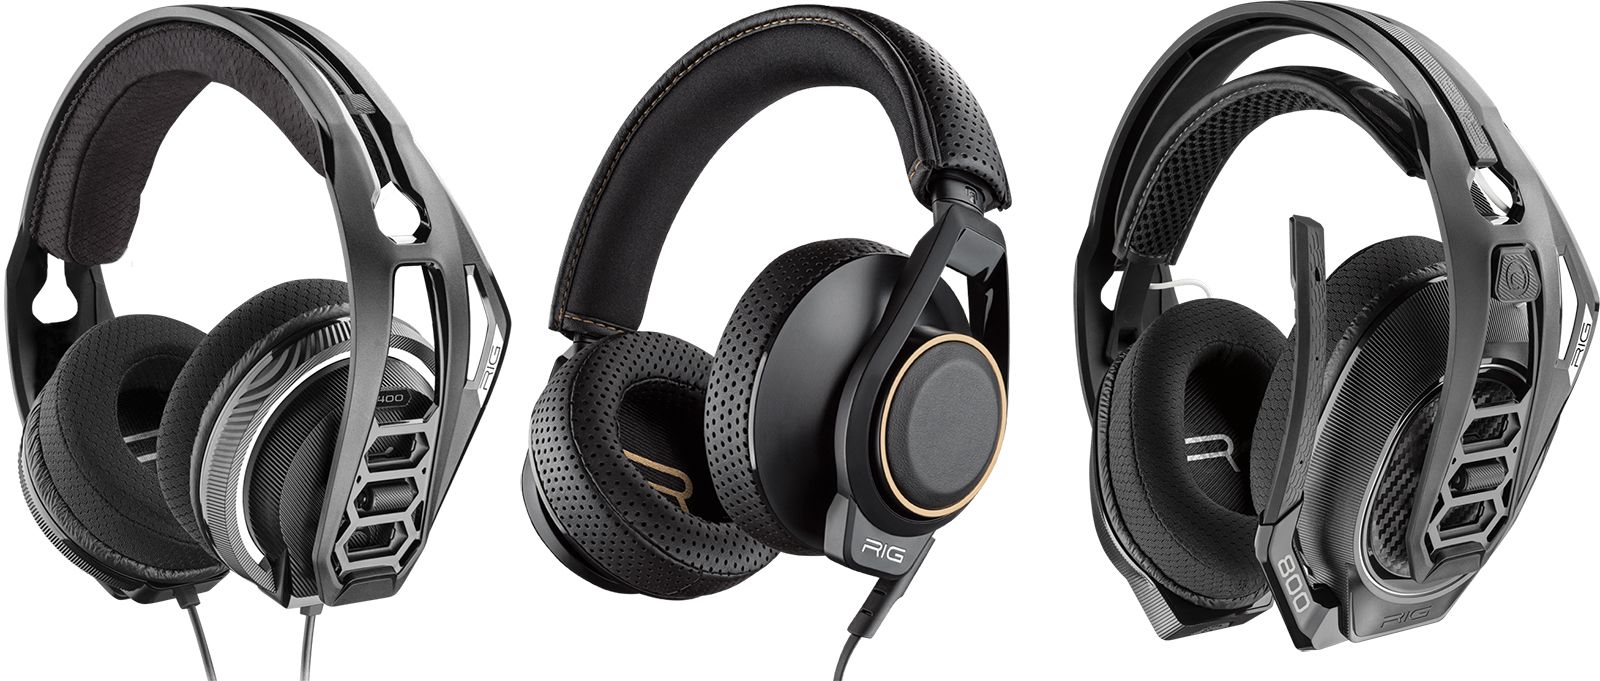 plantronics trio of rig headsets deliver dolby atmos on xbox one project scorpio and windows 10 image 1